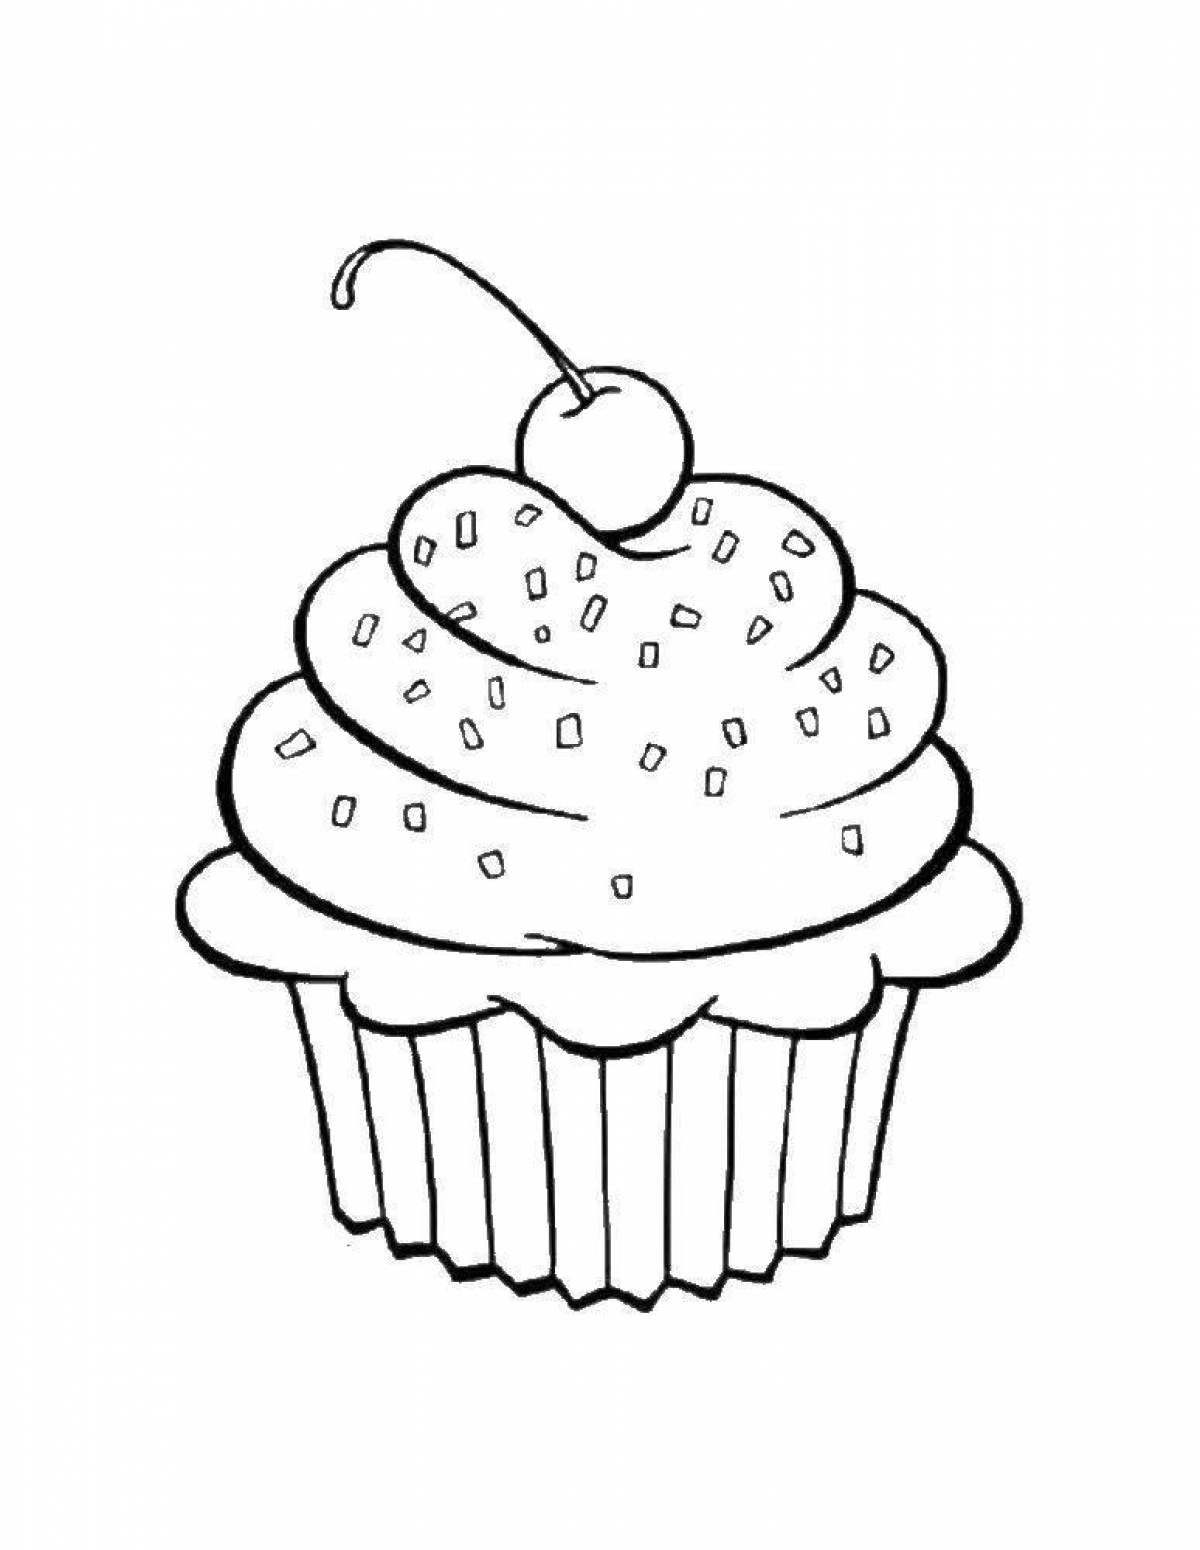 Gorgeous cupcake coloring page